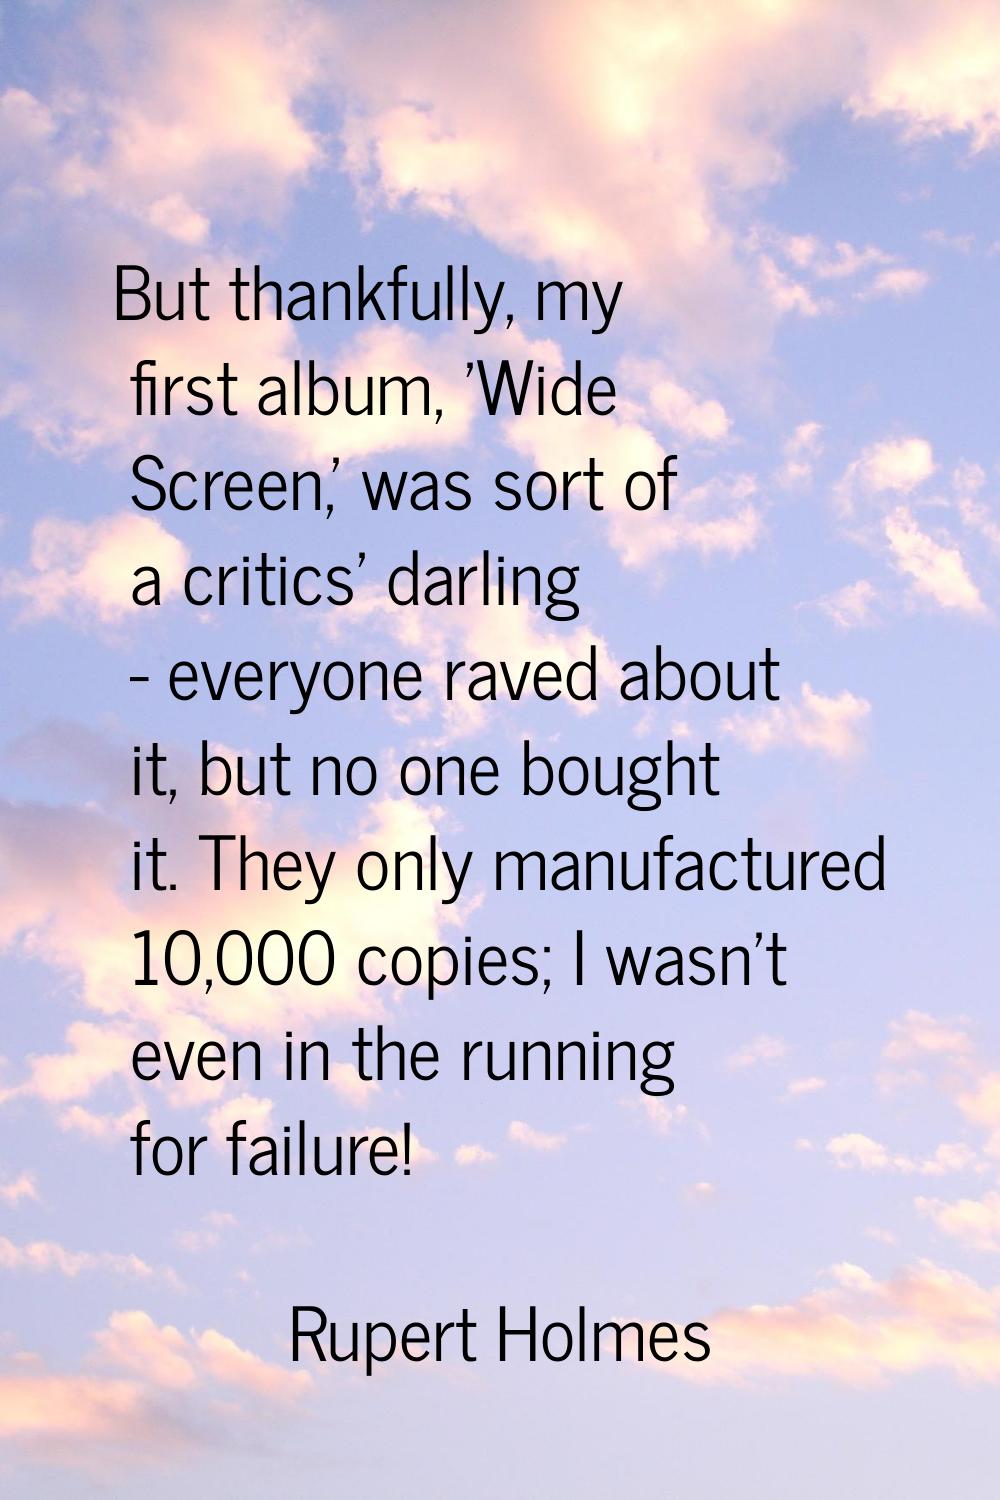 But thankfully, my first album, 'Wide Screen,' was sort of a critics' darling - everyone raved abou